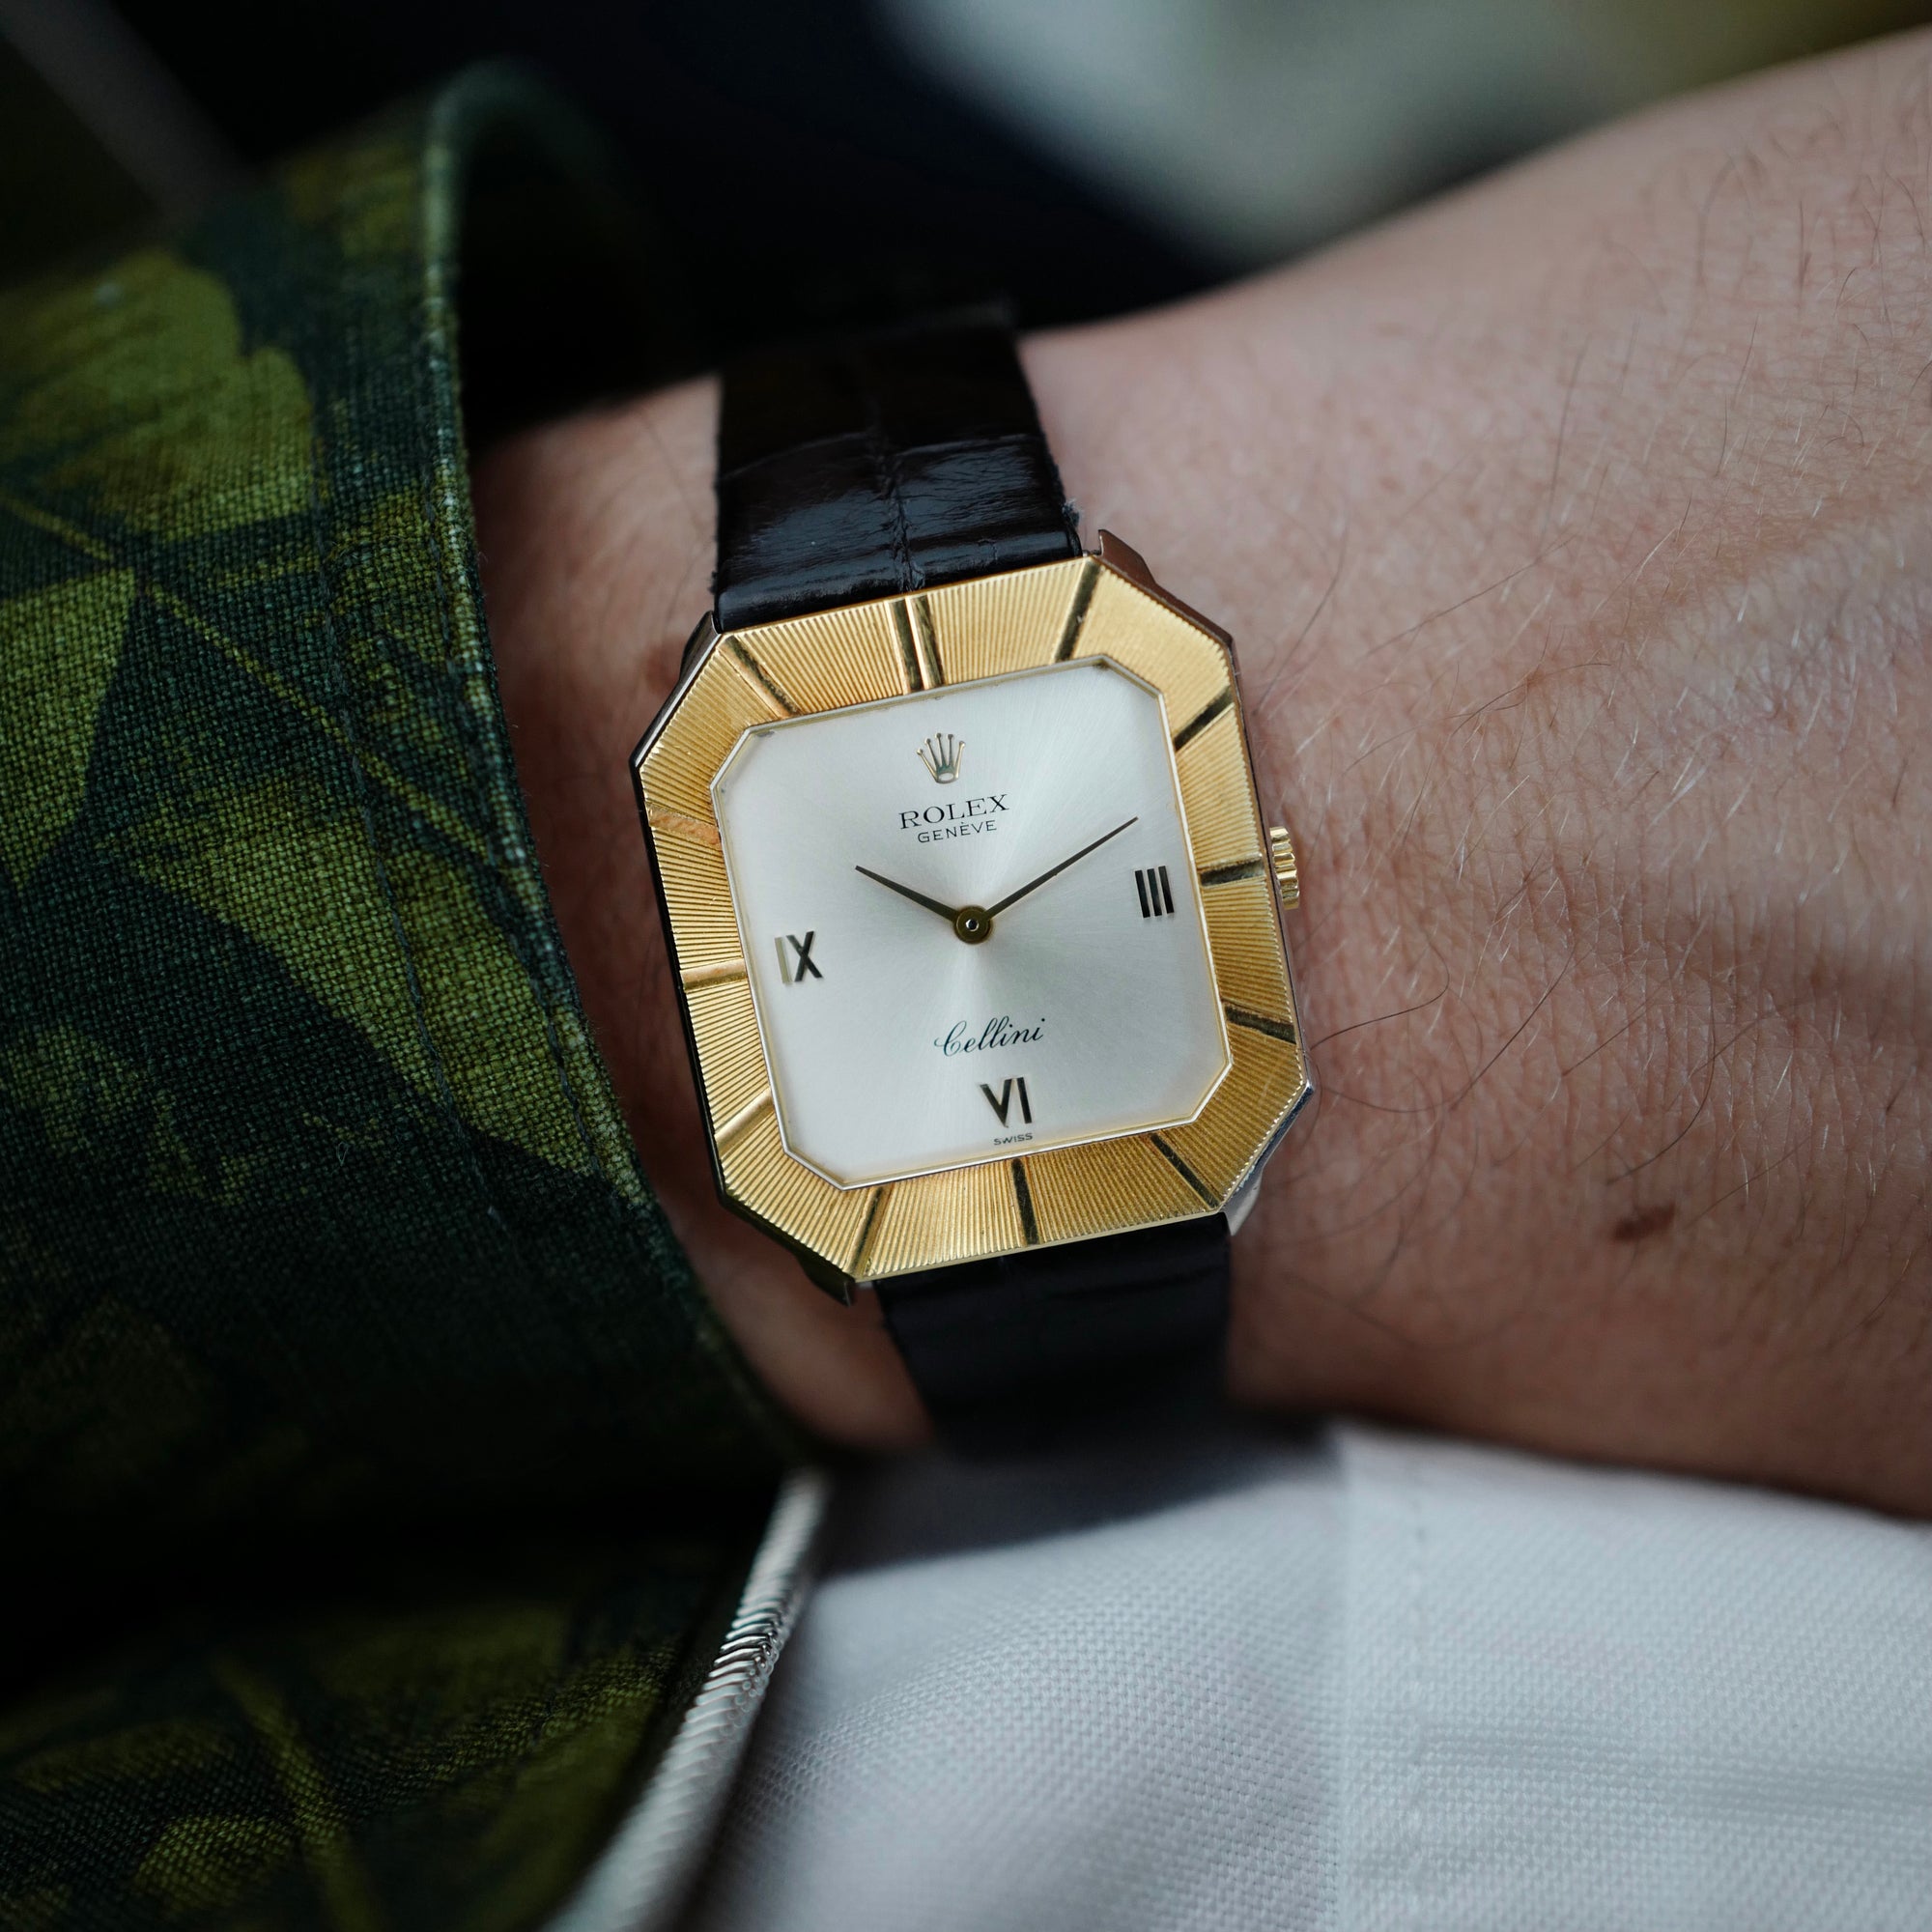 Rolex - Rolex White and Yellow Gold Cellini Ref. 4150 - The Keystone Watches